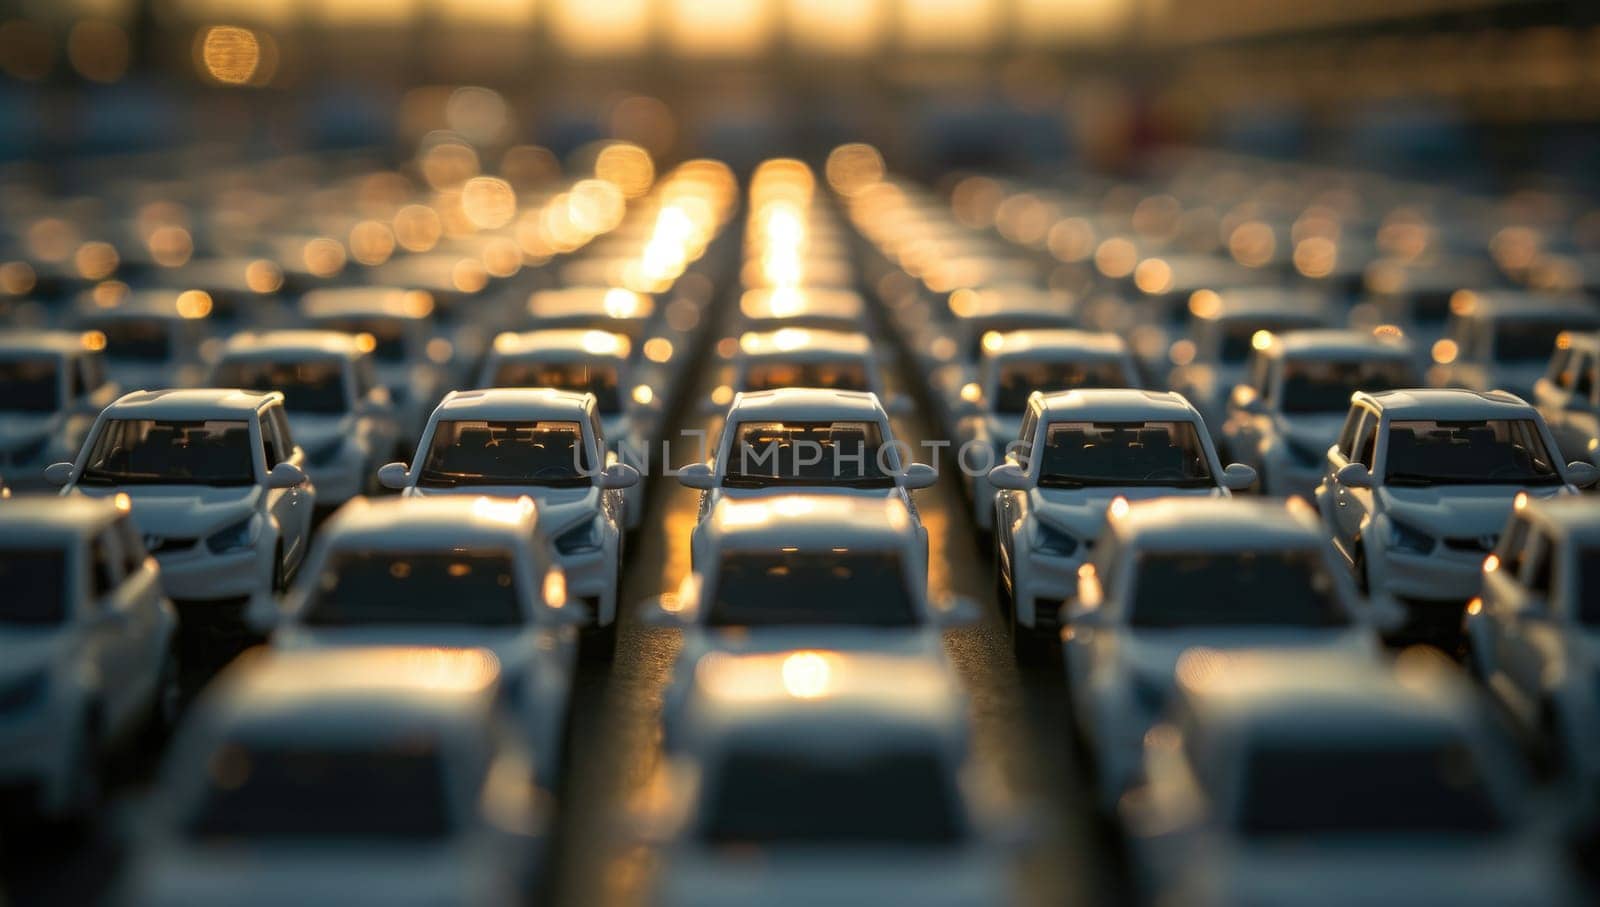 New cars lined up in parking lot at sunset by ailike